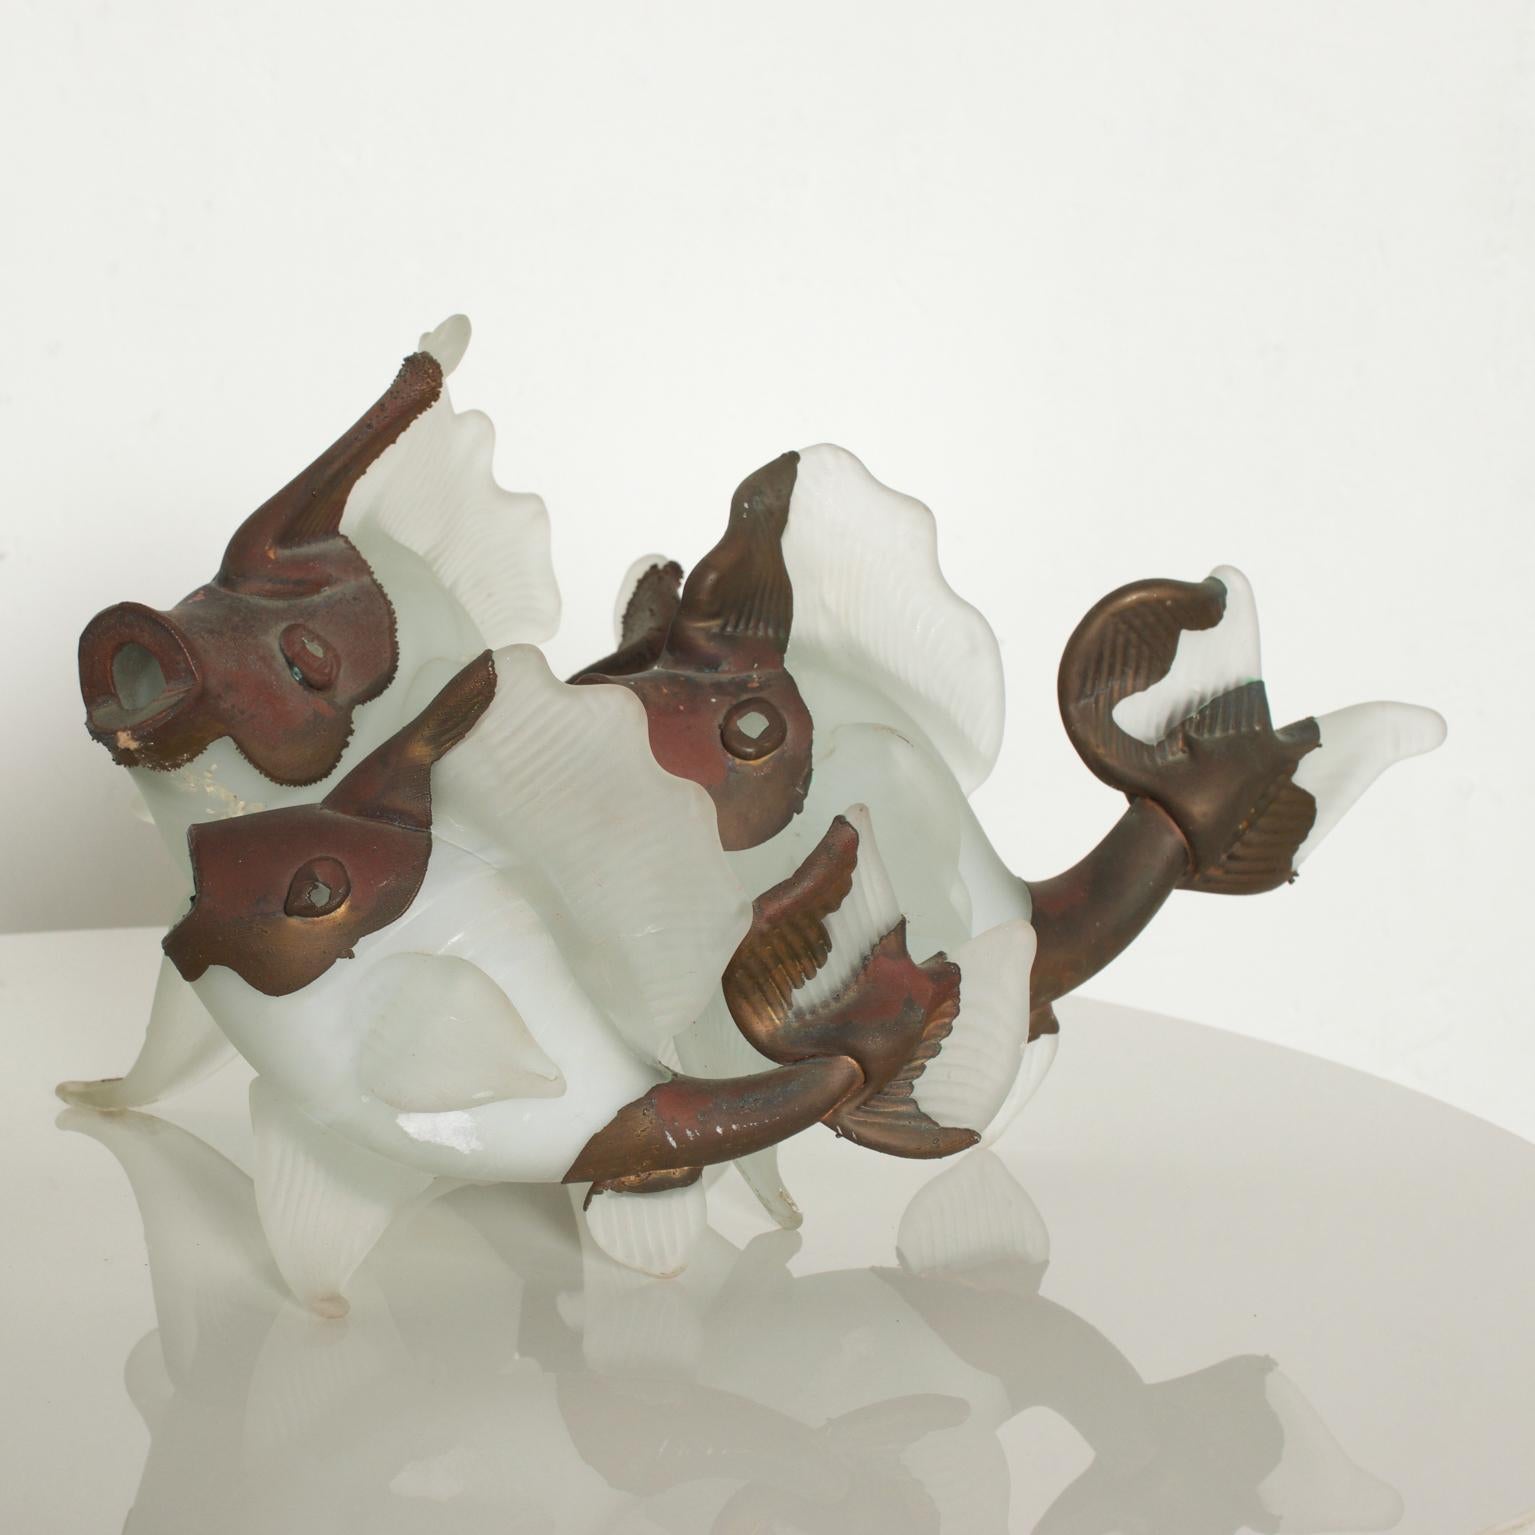 For your pleasure: Elegant Vintage Modern Set of 3 fish designed with hand blown glass and trimmed in copper. By Romanian Artist, Filip Ravert dimensions: #1-11 /2